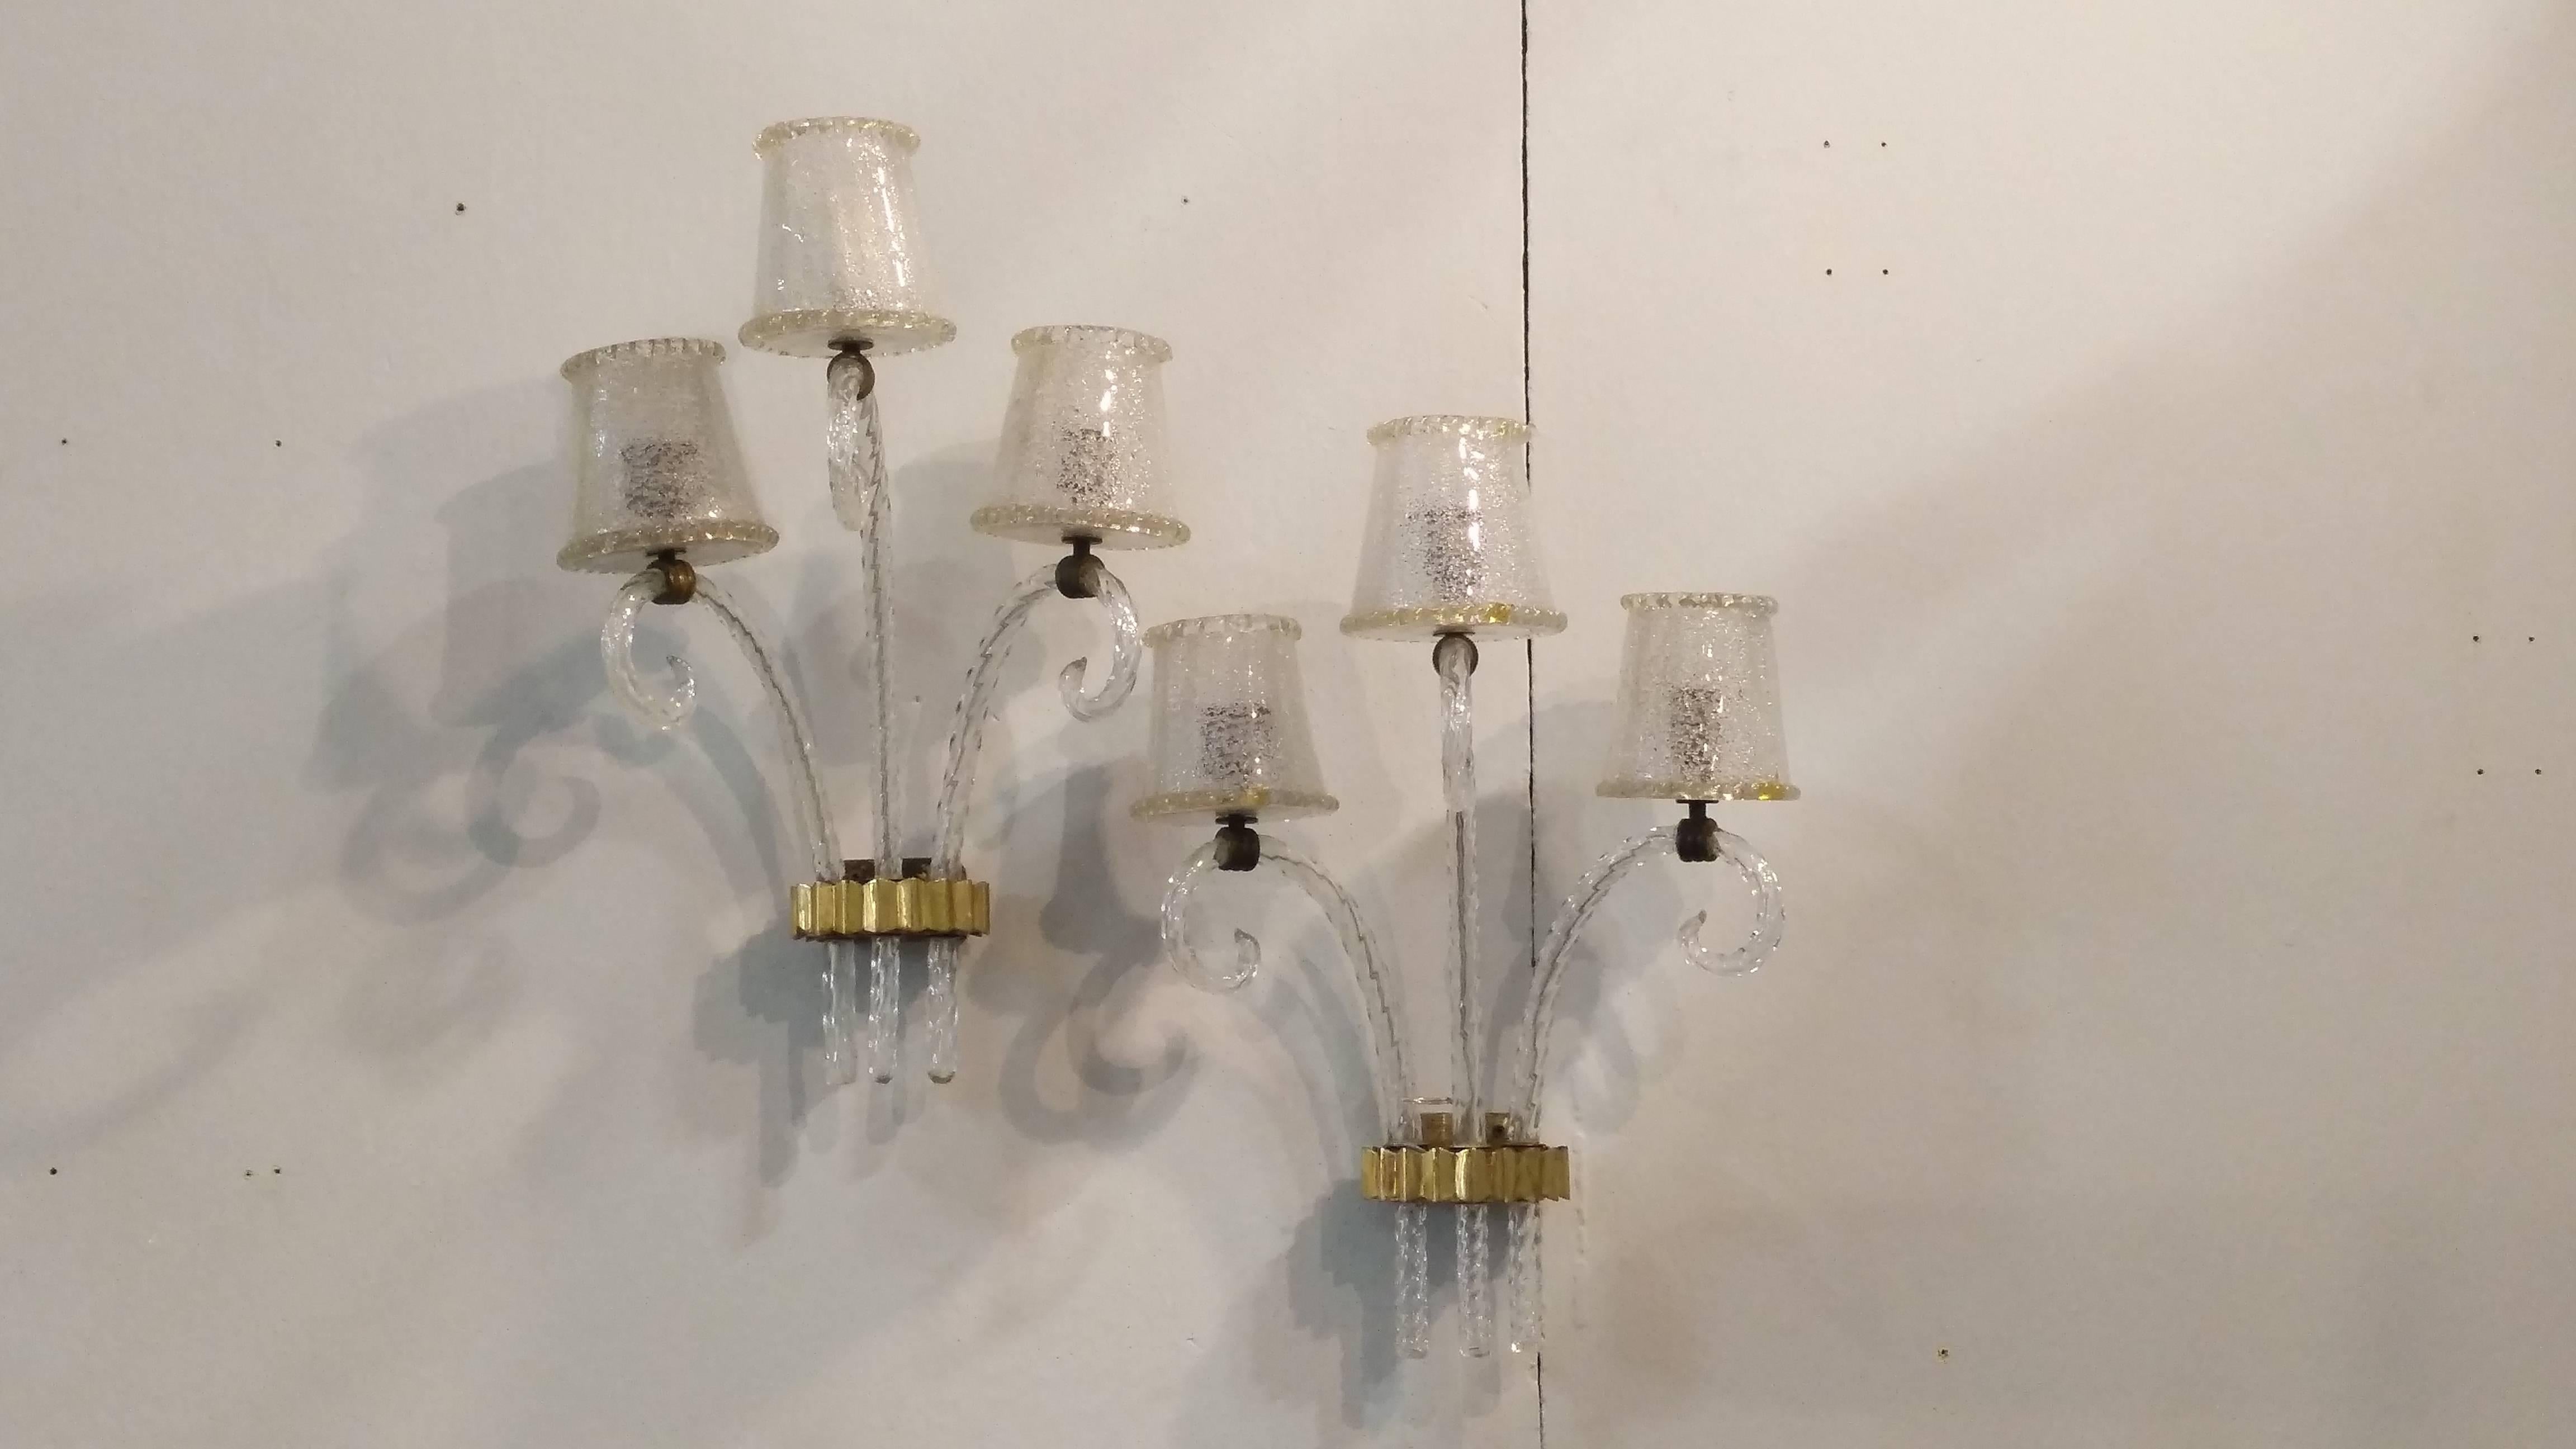 Pair of wall sconces by Barovier, 1940 brass structure surmounted by three corded glass arms with three 